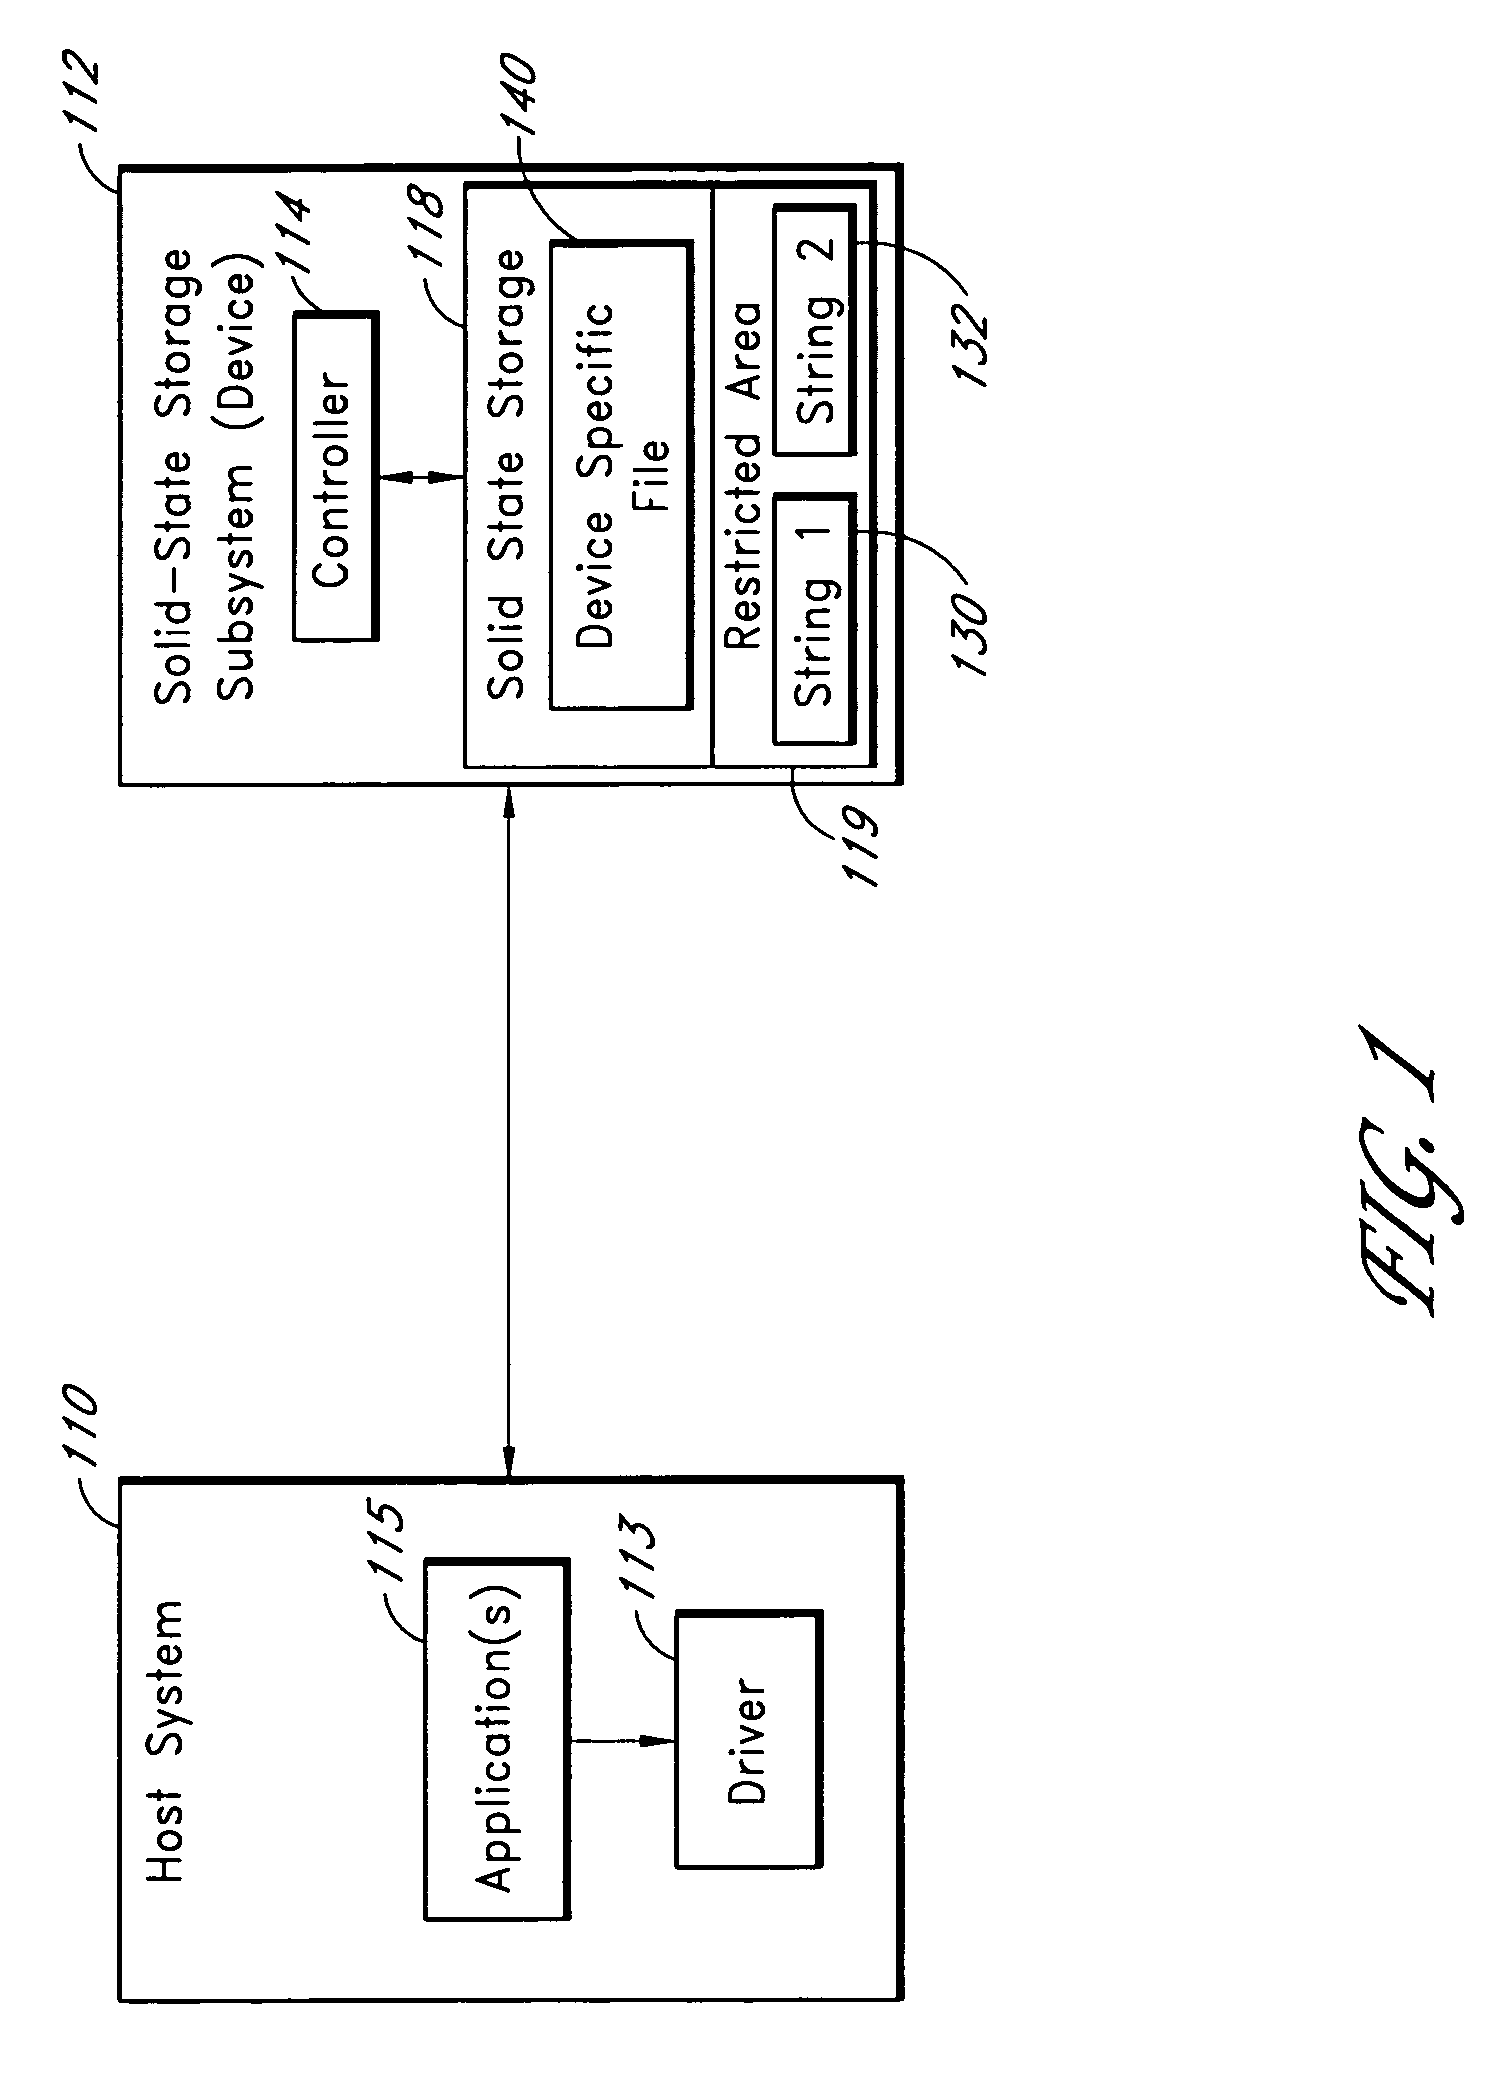 System for controlling use of a solid-state storage subsystem